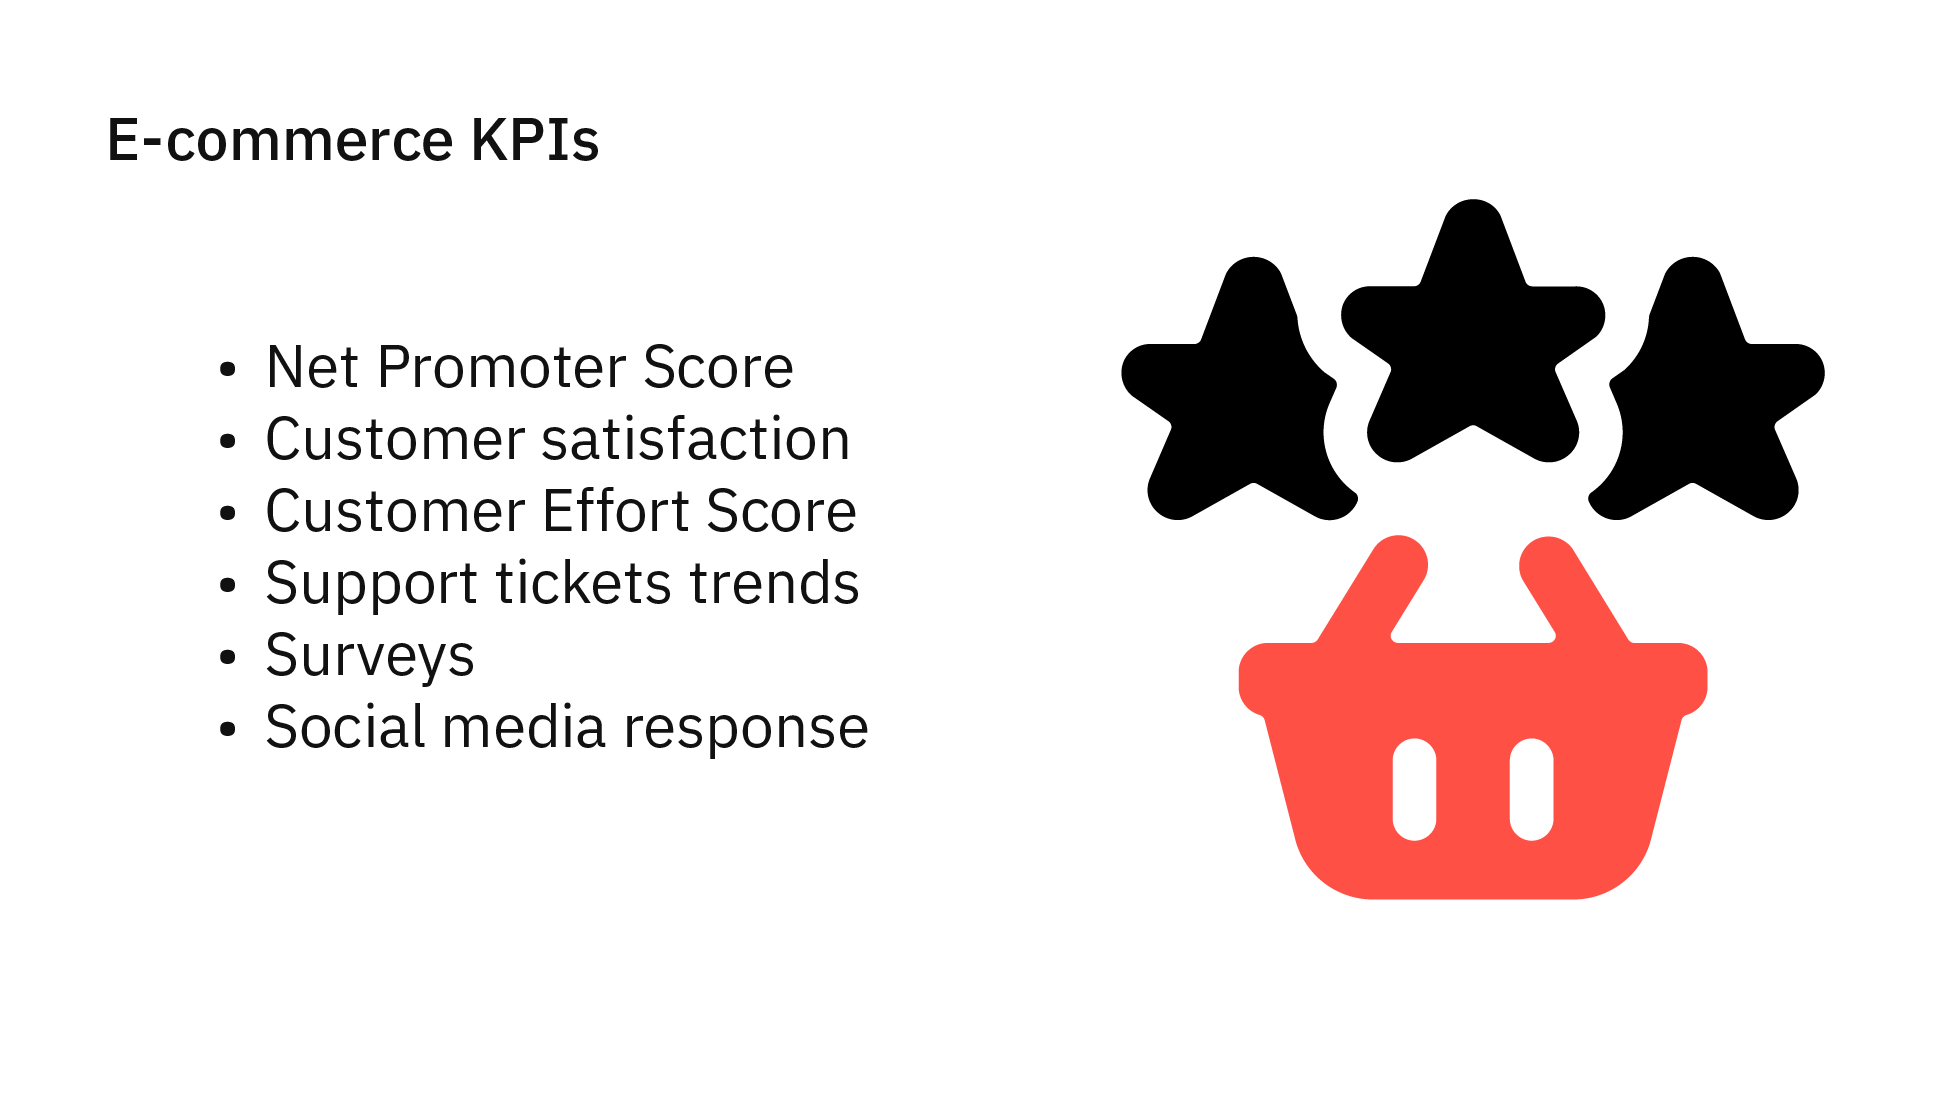 Infographic showing e-commerce KPIs